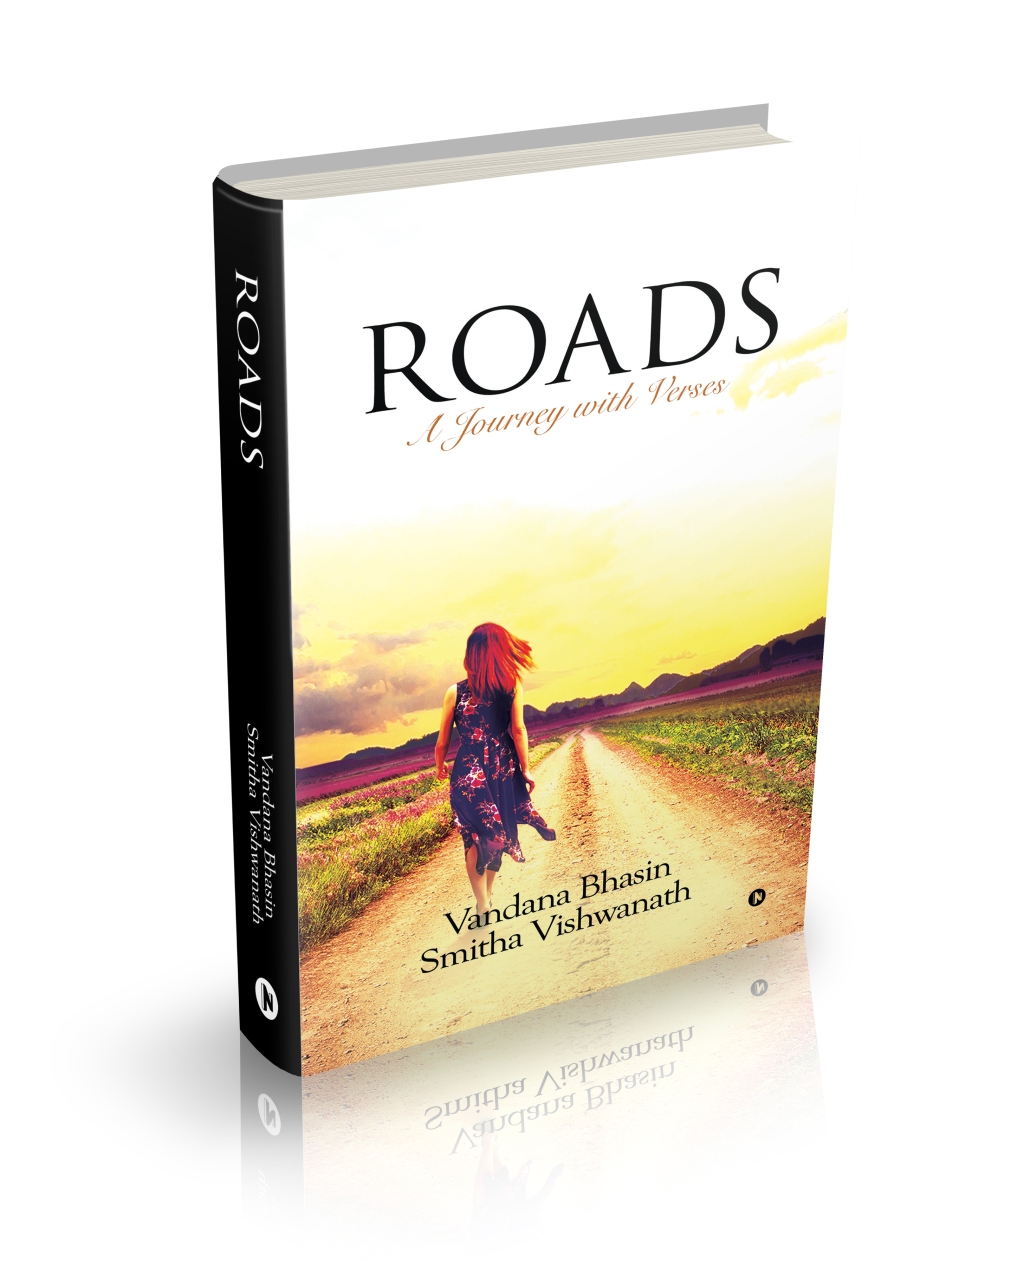 Book Review : Roads – A Journey with Verses